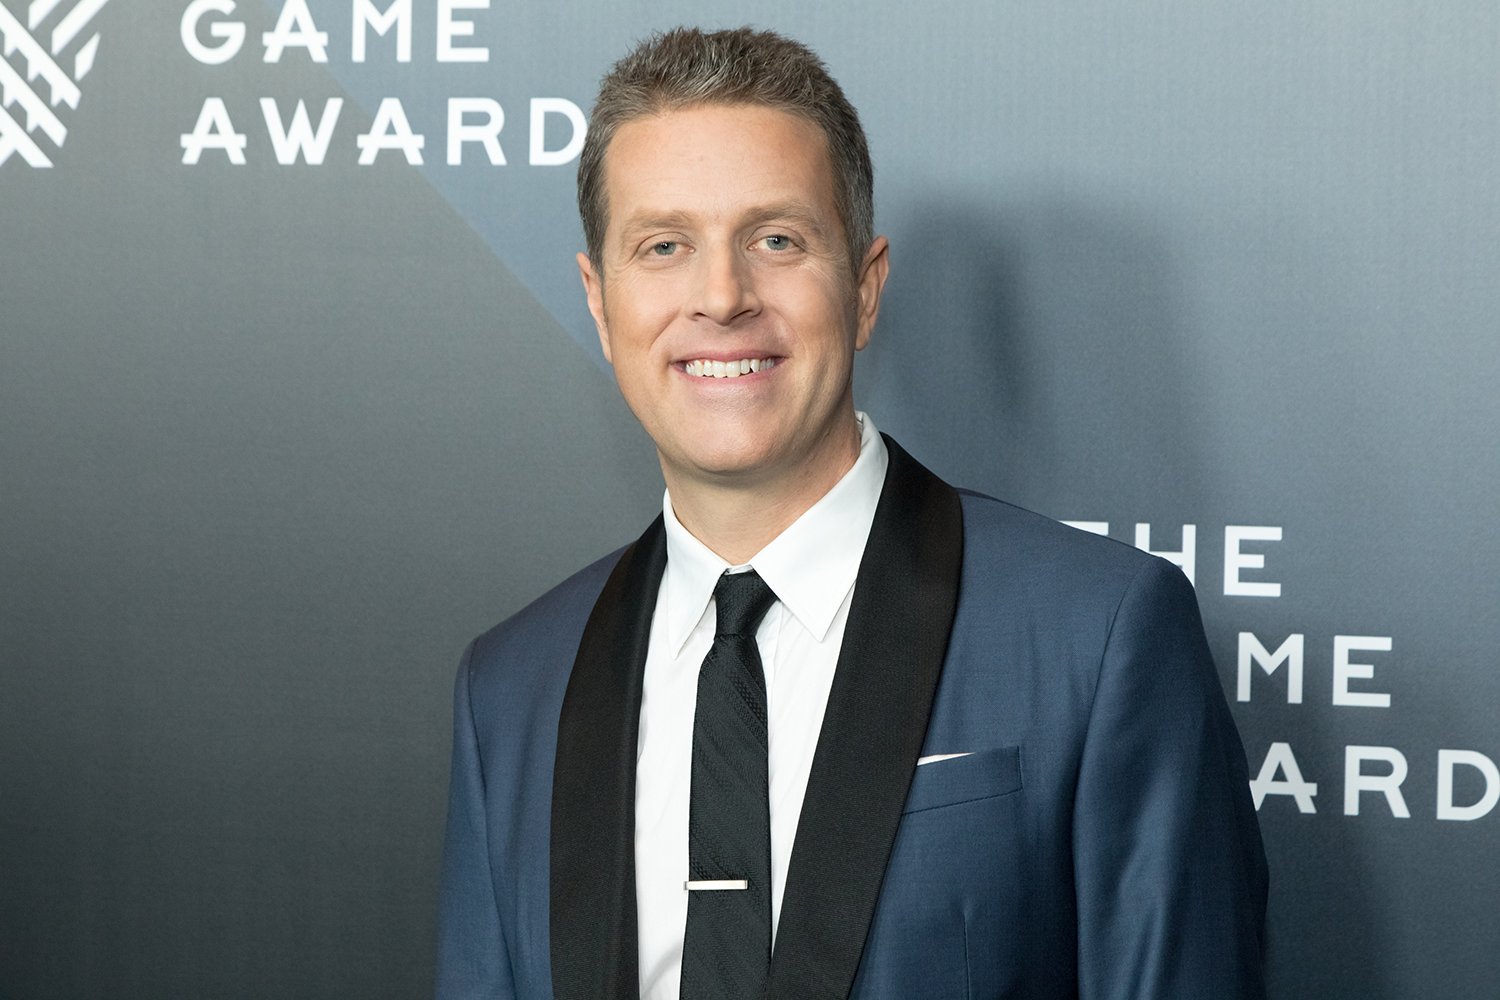 Geoff Keighley, host of The Game Awards 2021, has announced the nominees.